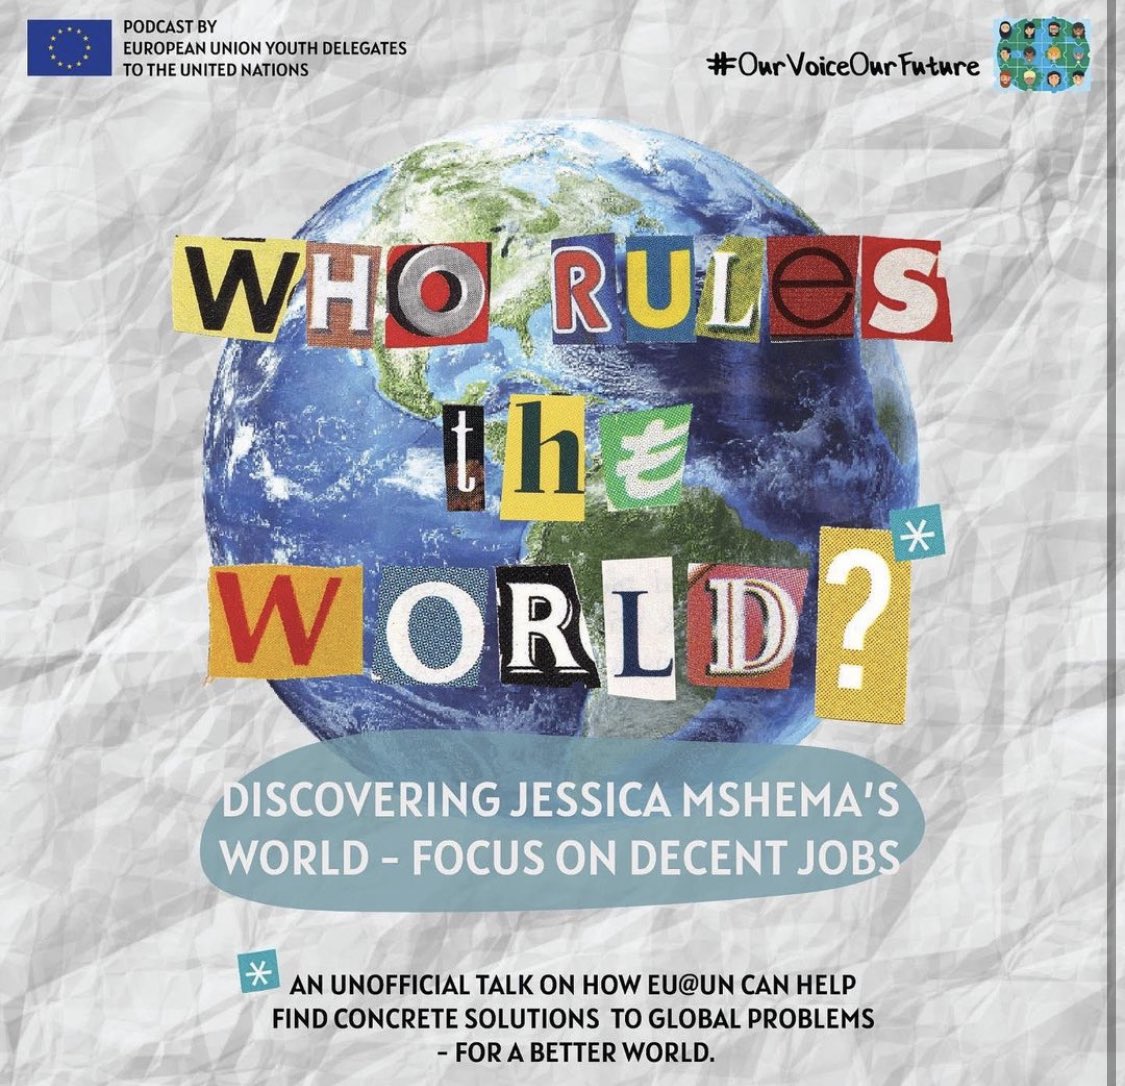 How can we ensure decent jobs for all? ✨

That was one of the questions @nadia_g_c and @LKarnelutti talked about with @jessicamshama in the #whorulestheworld podcast. 

Tune in and listen to the episode here👇🏻 
open.spotify.com/episode/2LbfwJ…

#OurVoiceOurFuture